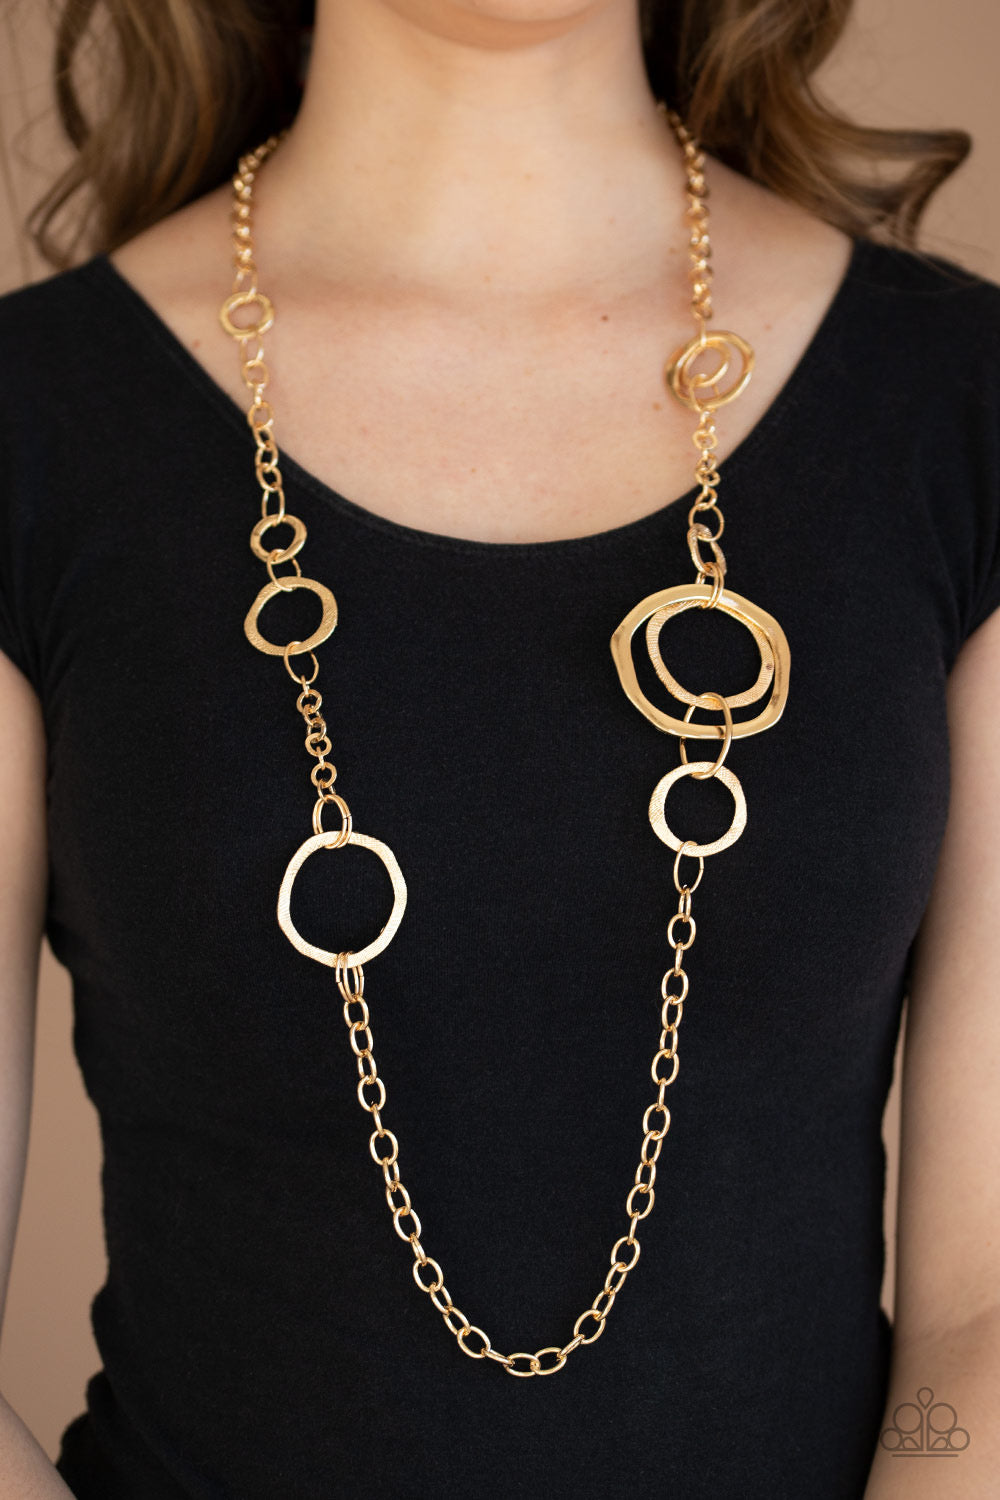 Amped Up Metallics Necklace - Gold